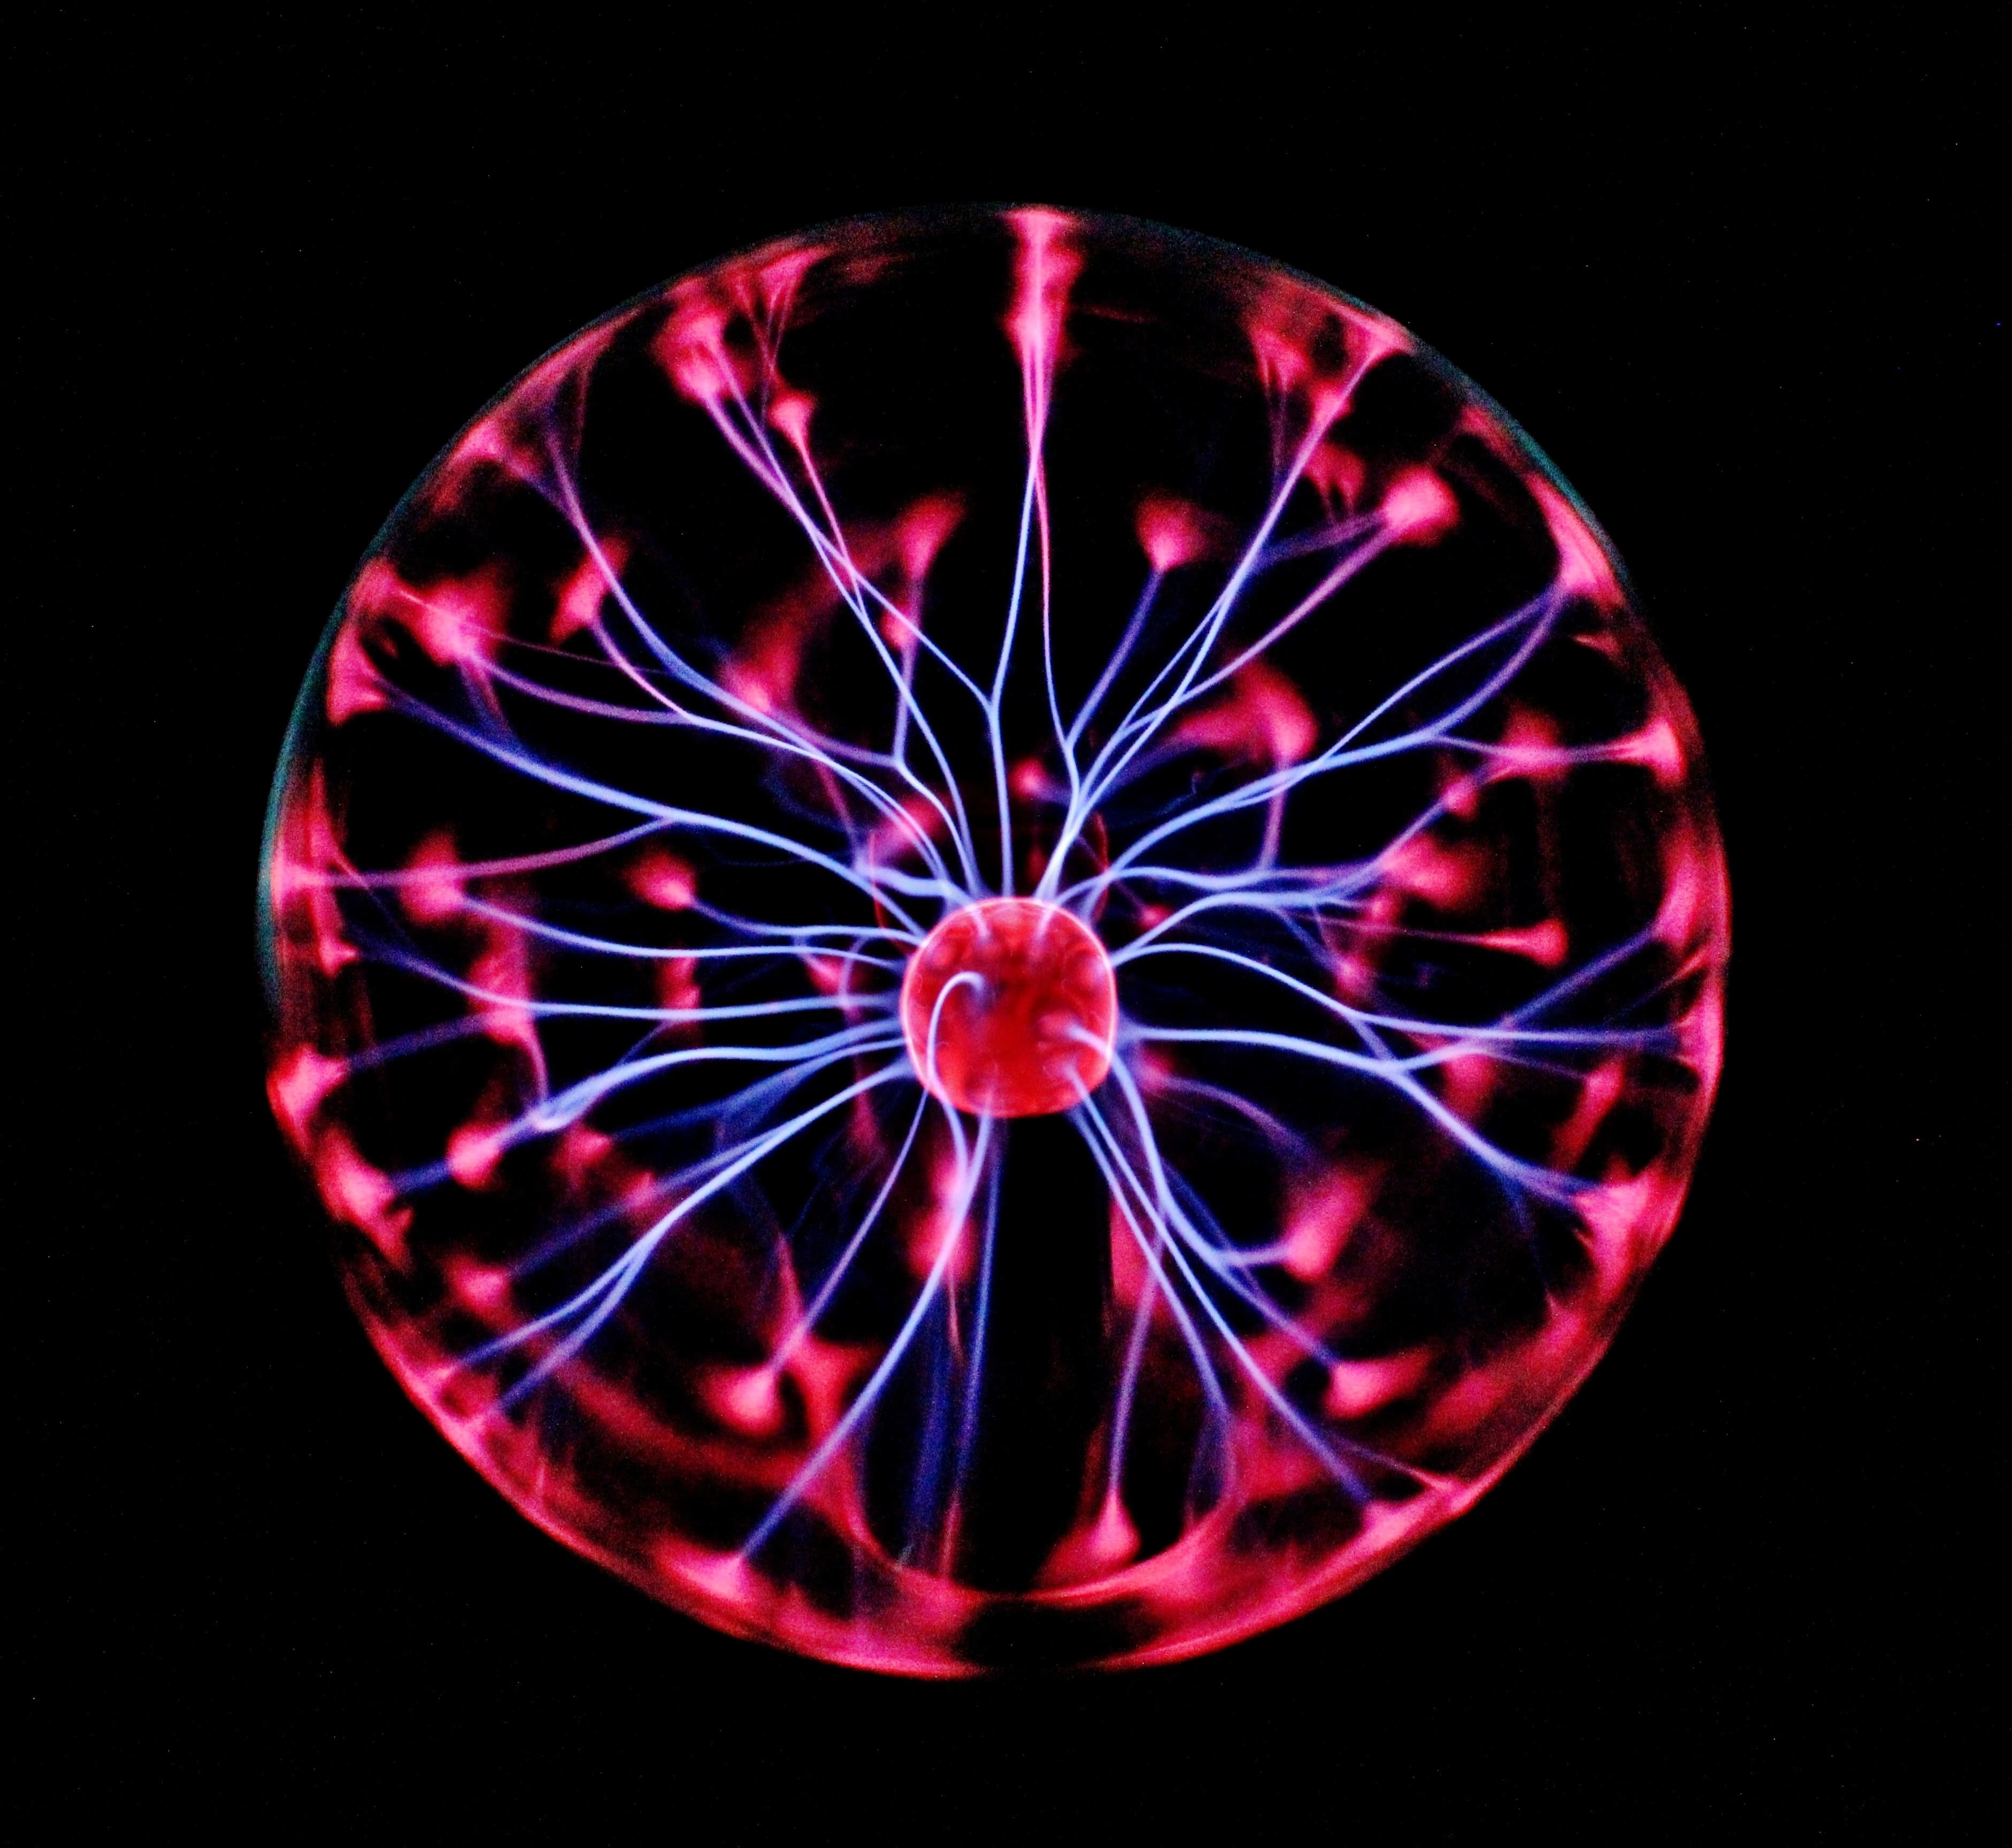 Plasma ball, a clear spherical glass container that is filled with a low-pressure mixture of gases that are ionized by an electric current, creating colorful streamers of light within. A bright purple ball is at the center of the image, with the light streaming out in tendrils of white, blue and pink. The tendrils appear to be flowing out of the plasma ball and they are not symmetrically arranged. The background is completely black, with no visible shapes or textures.